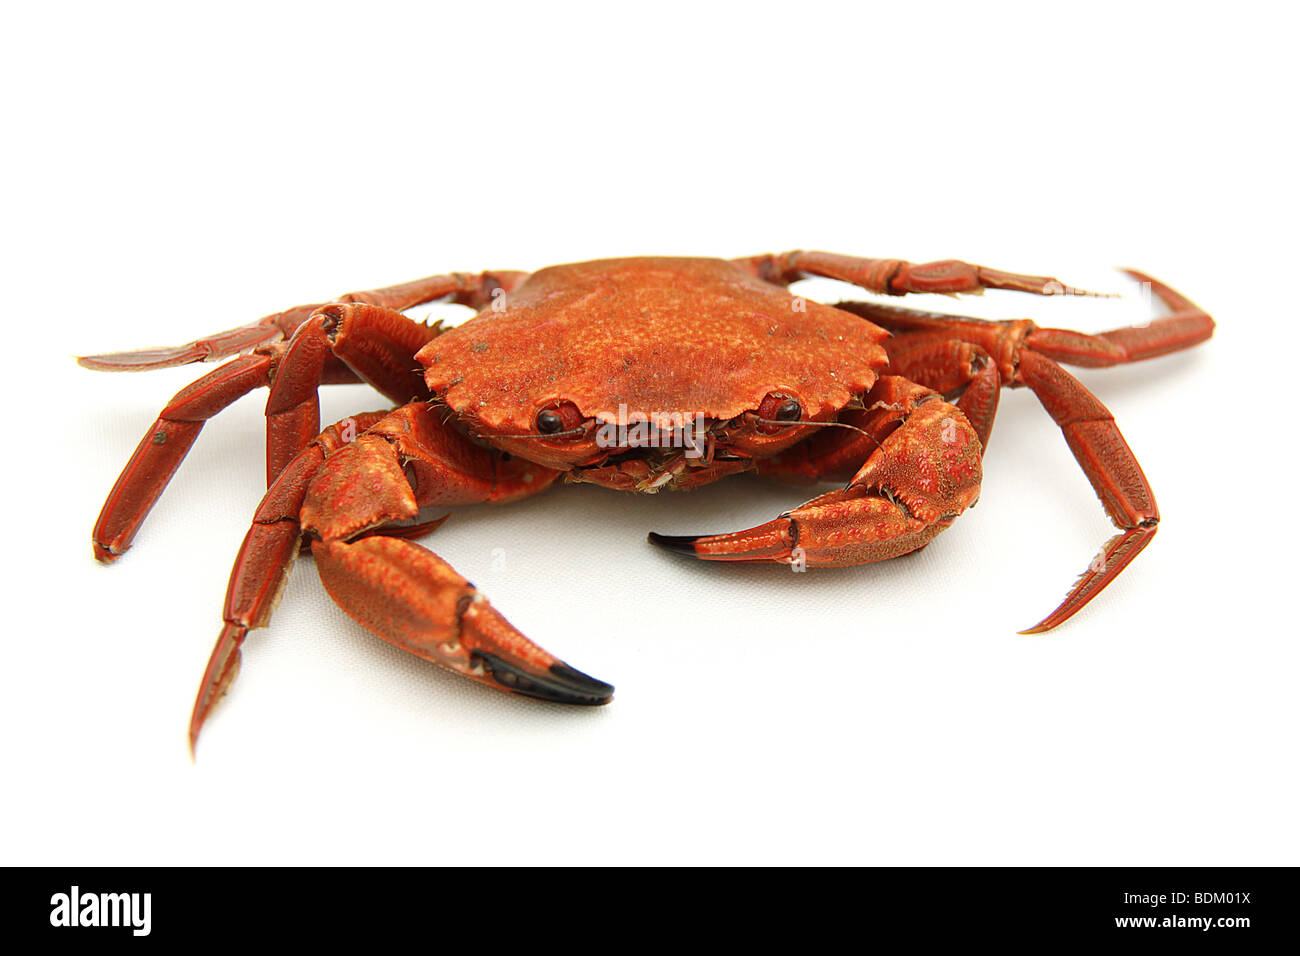 just one single boiled crab on isolated background Stock Photo